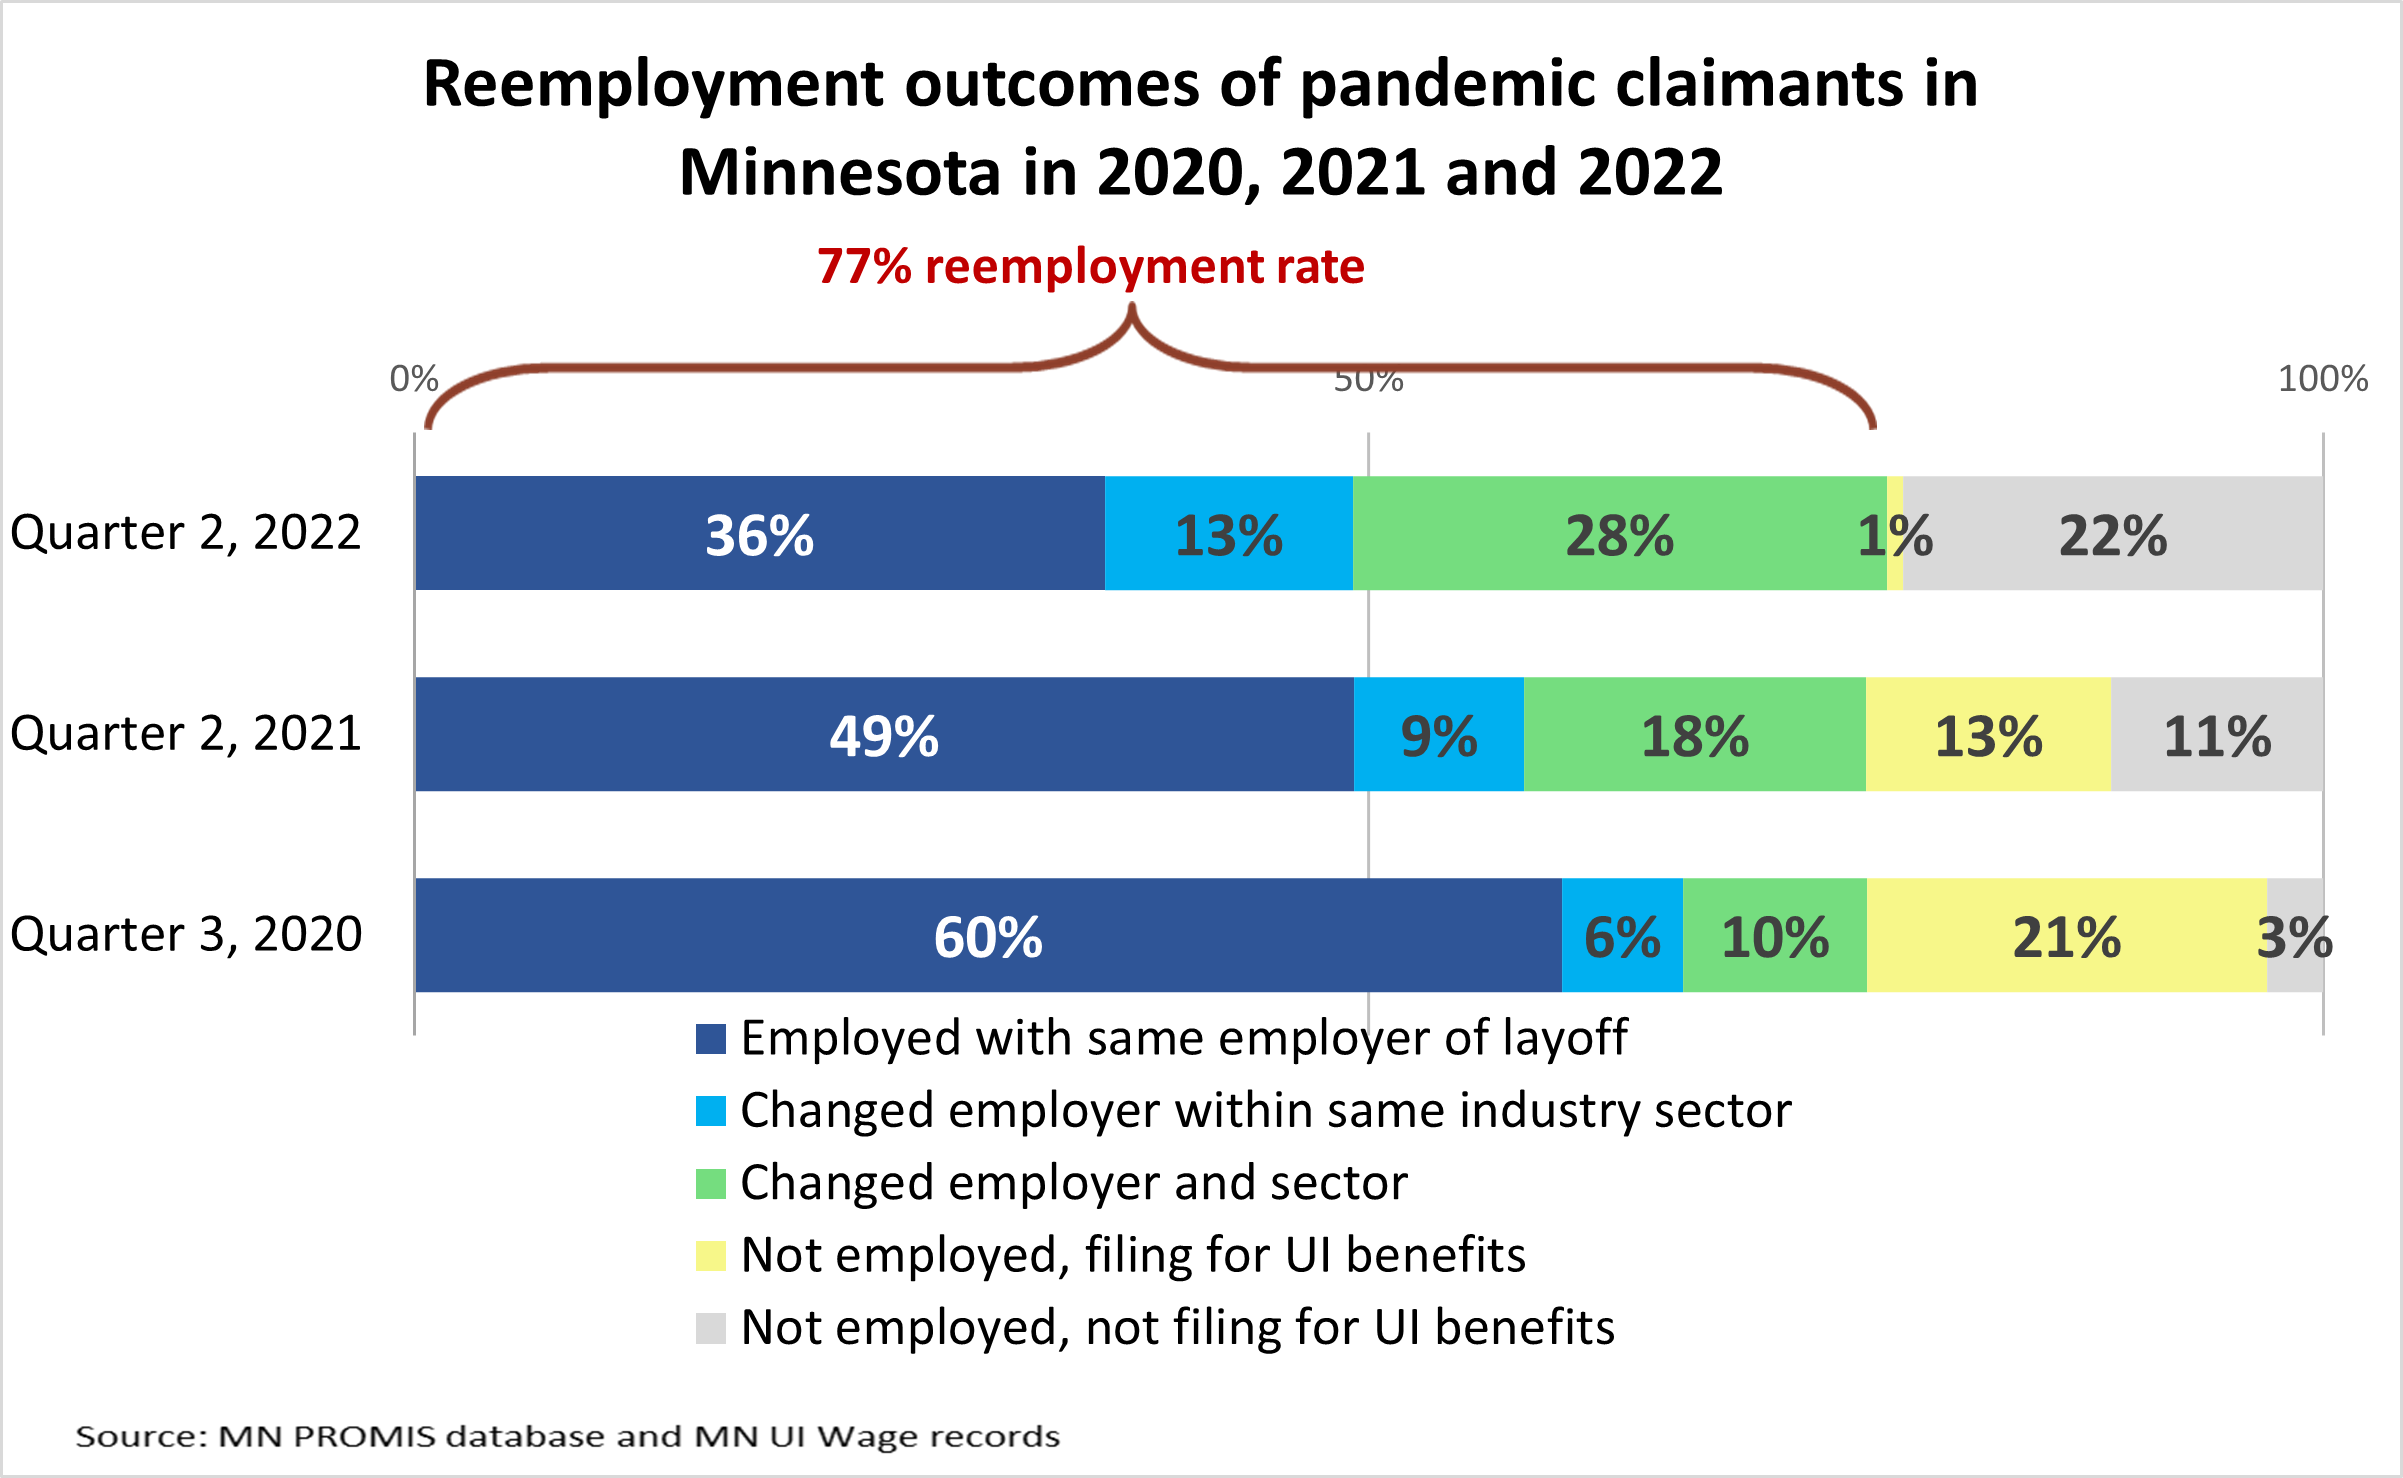 Reemployment outcomes of pandemic claimants in Minnesota